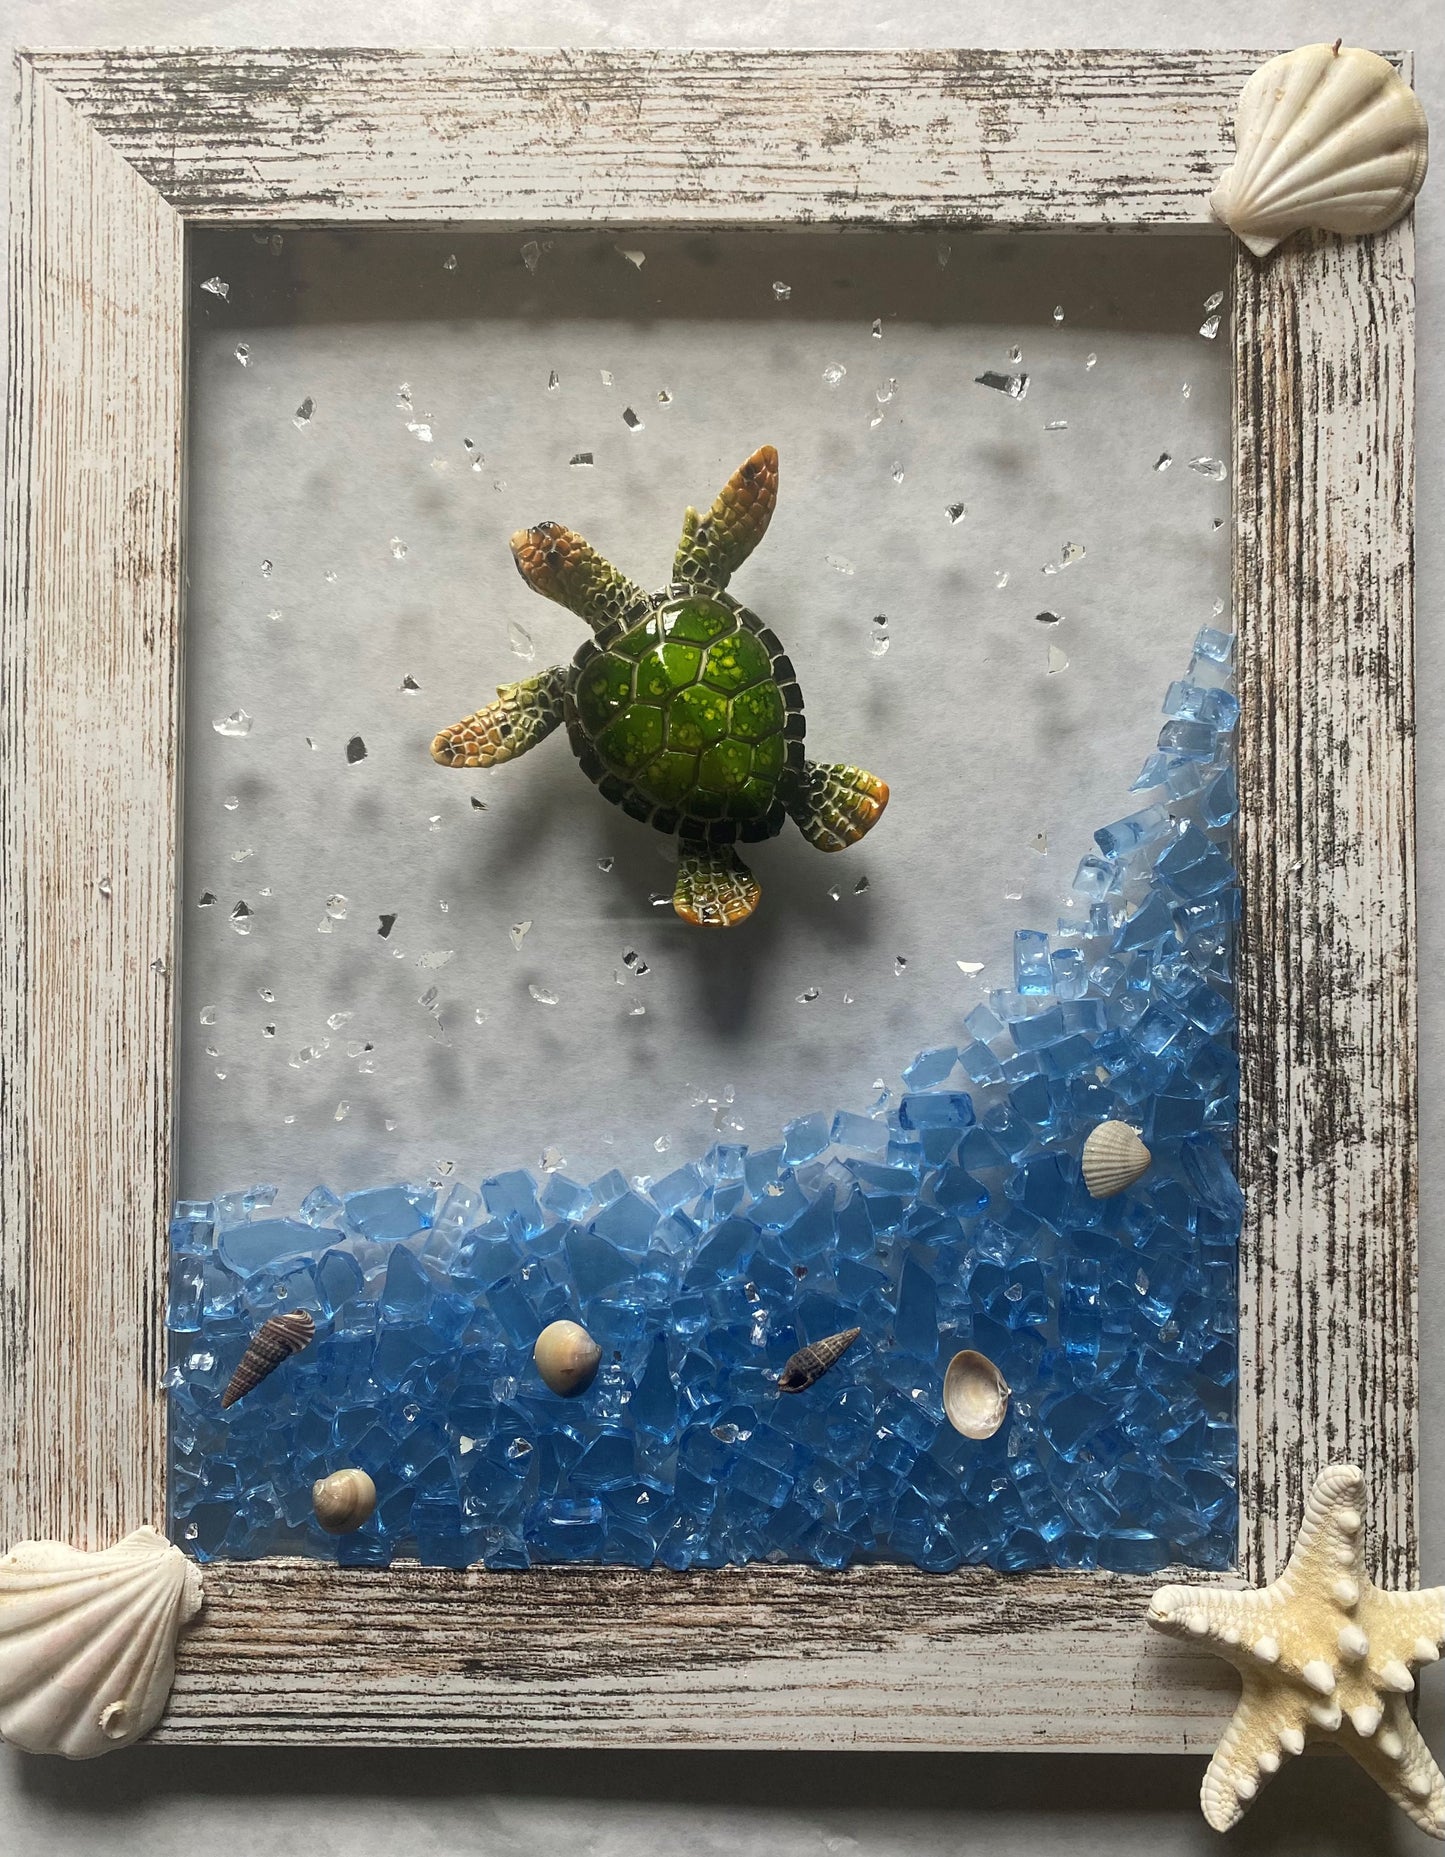 DIY Resin Art - Turtle & Glass for 8x10 Frame or Canvas